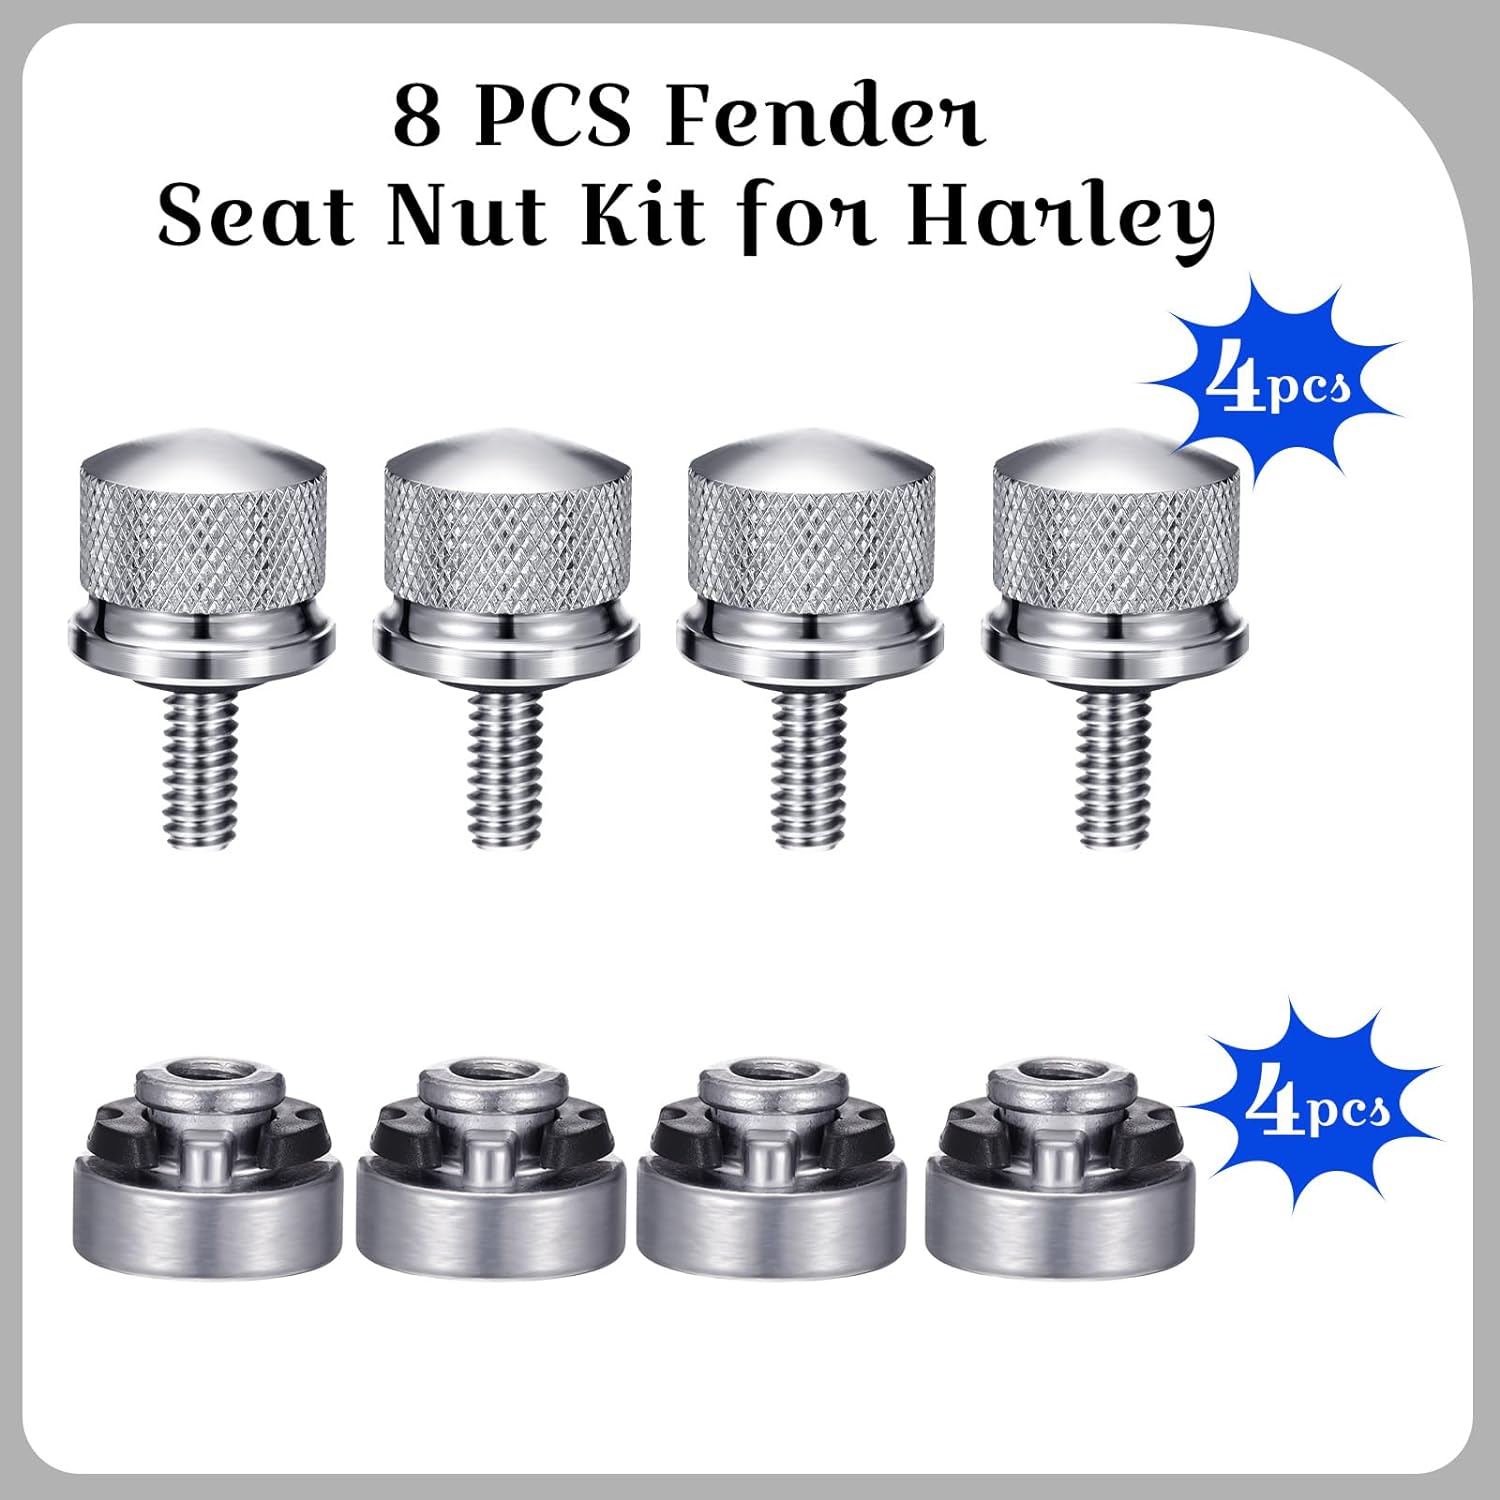 Therwen 8 Pcs Seat Bolt Screw Nut Kit Fender Seat Nut Kit 1/4-20 Thread Compatible with Harley-Davidson Sportster, Compatible with Softail Touring Dyna (Silver) - Therwen 8 Pcs Seat Bolt Screw Nut Kit Review